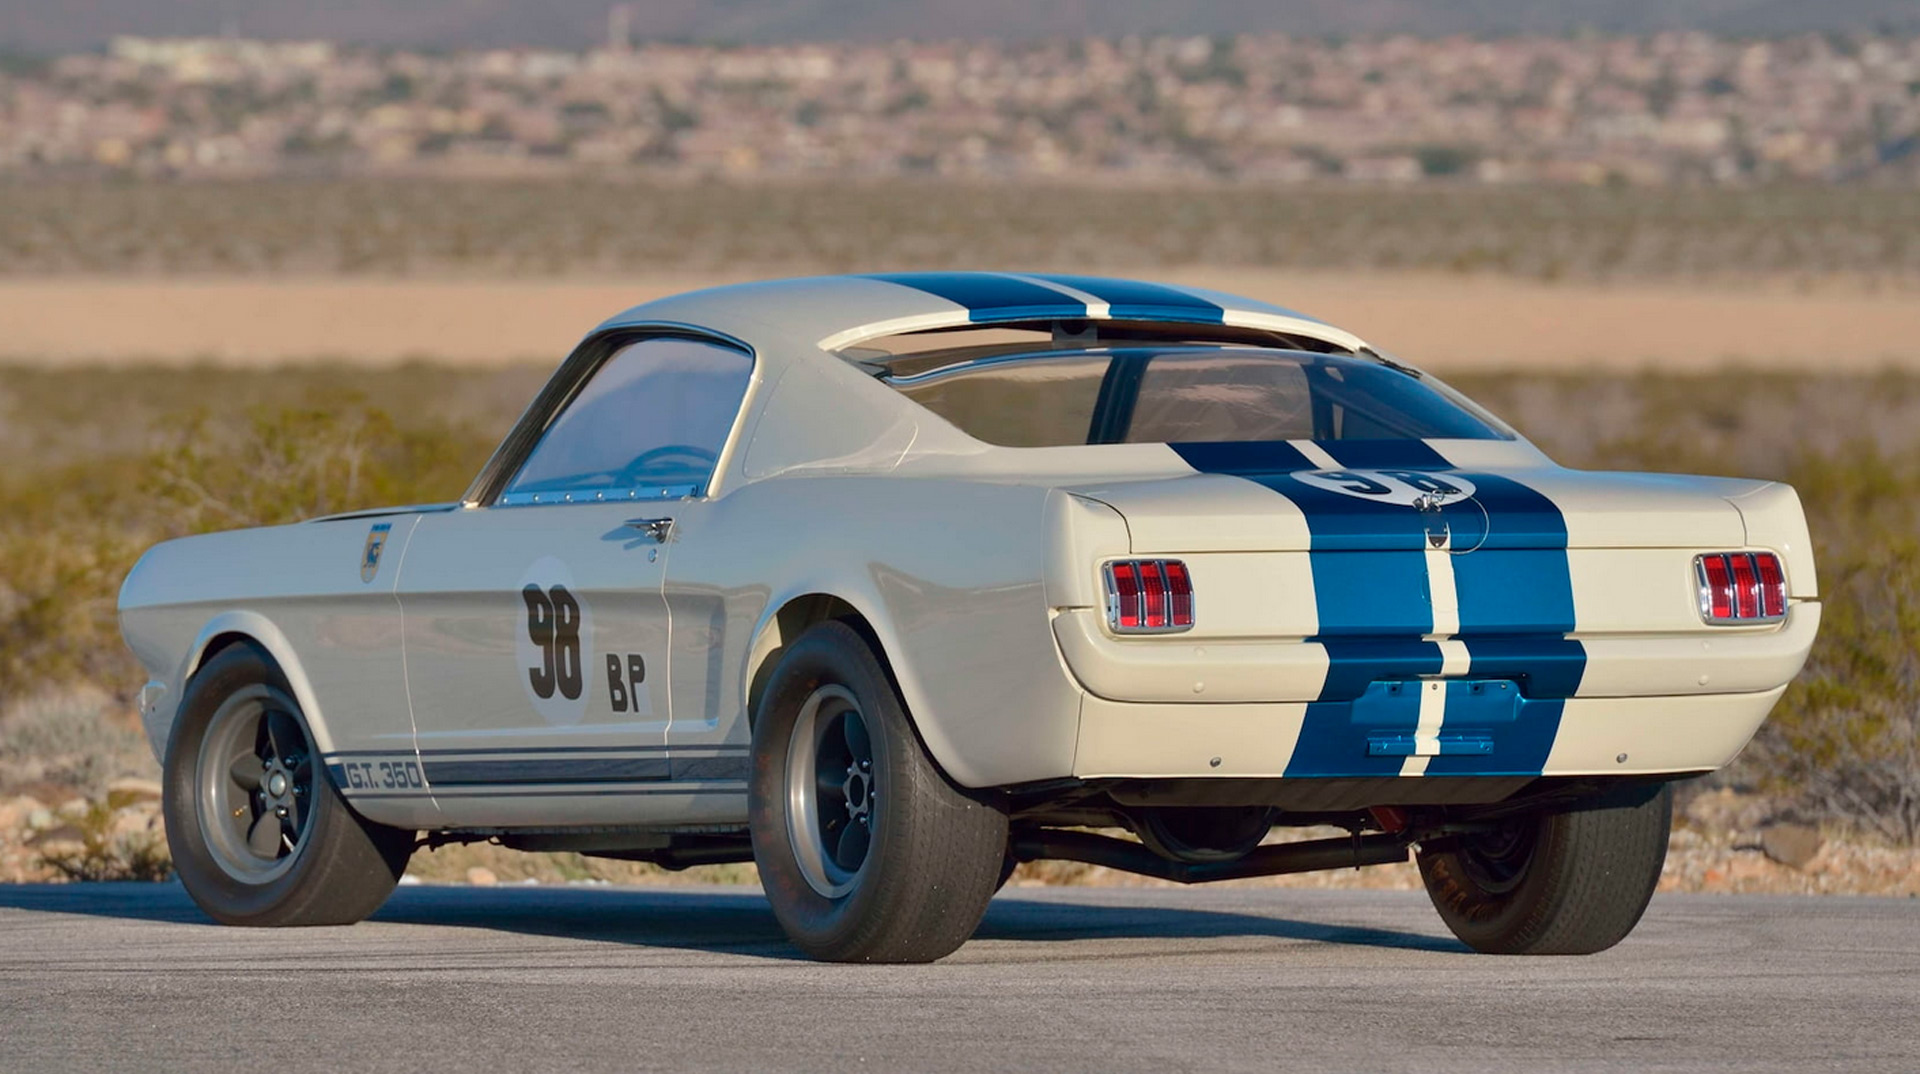 1965 Ford Shelby GT350 Competition with chassis no. 5R002